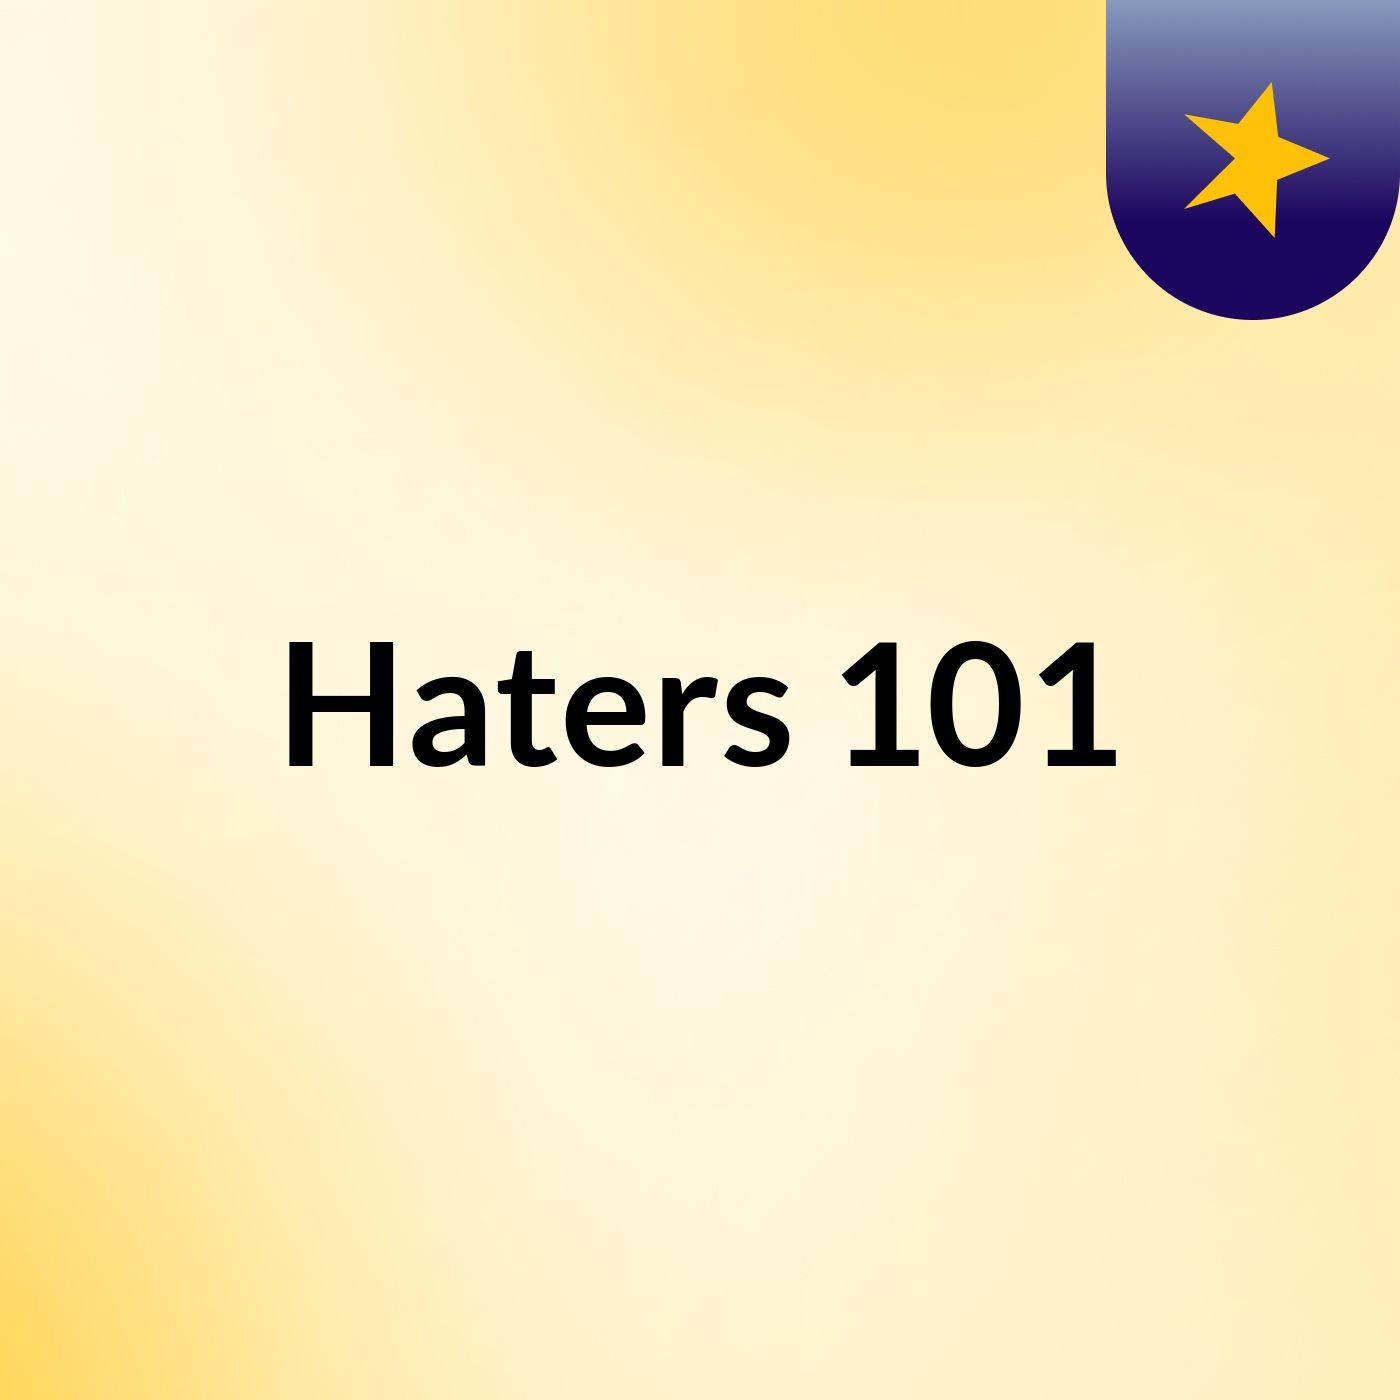 Haters 101